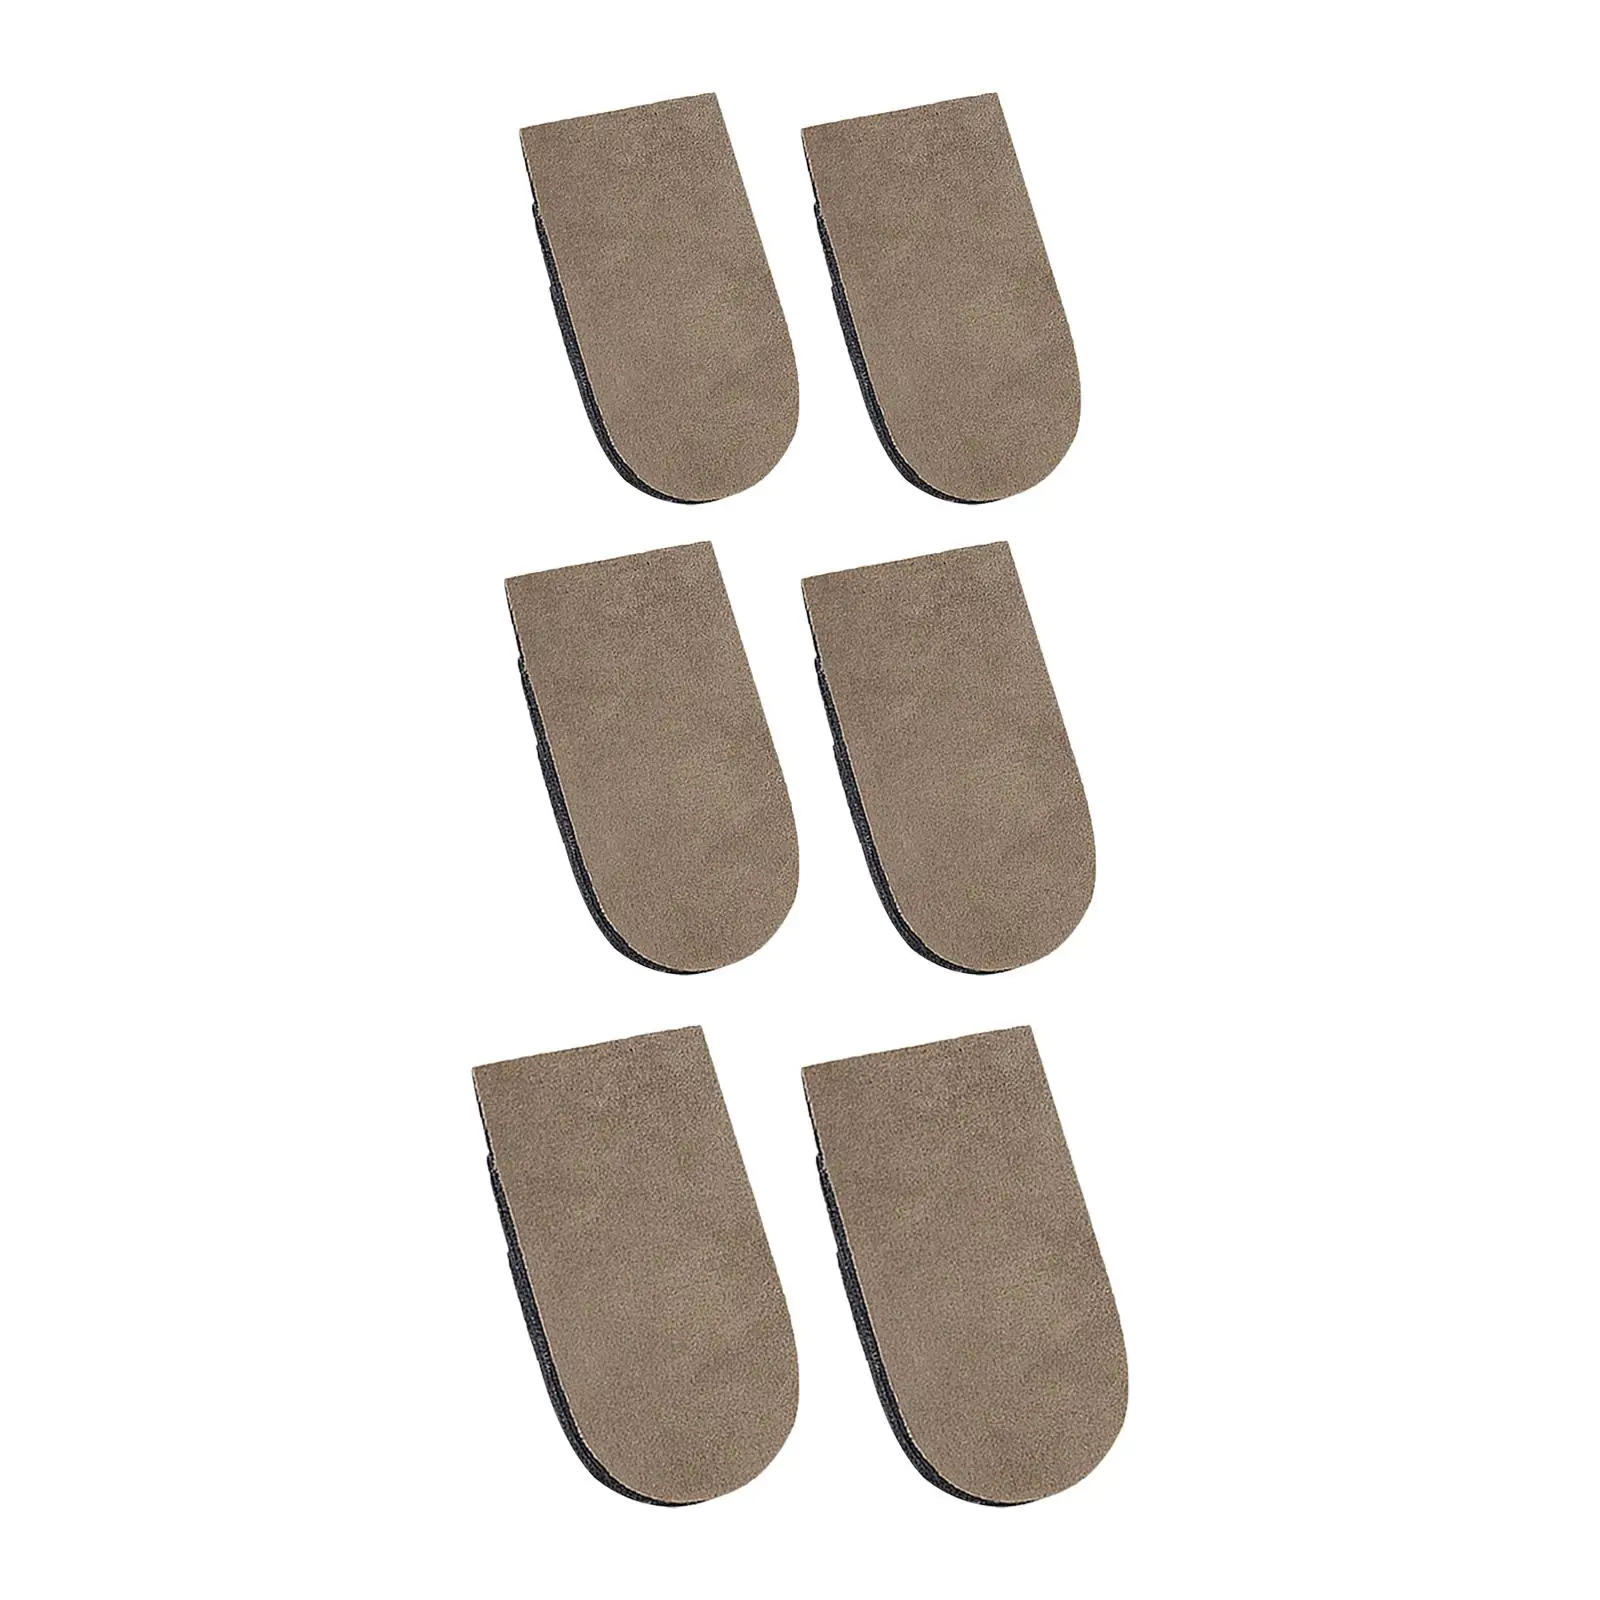 1 Pair Height Increase Insoles Invisible Anti Slip Breathable Heel Lift Inserts Heel Cushion Pads for Unisex Men Women